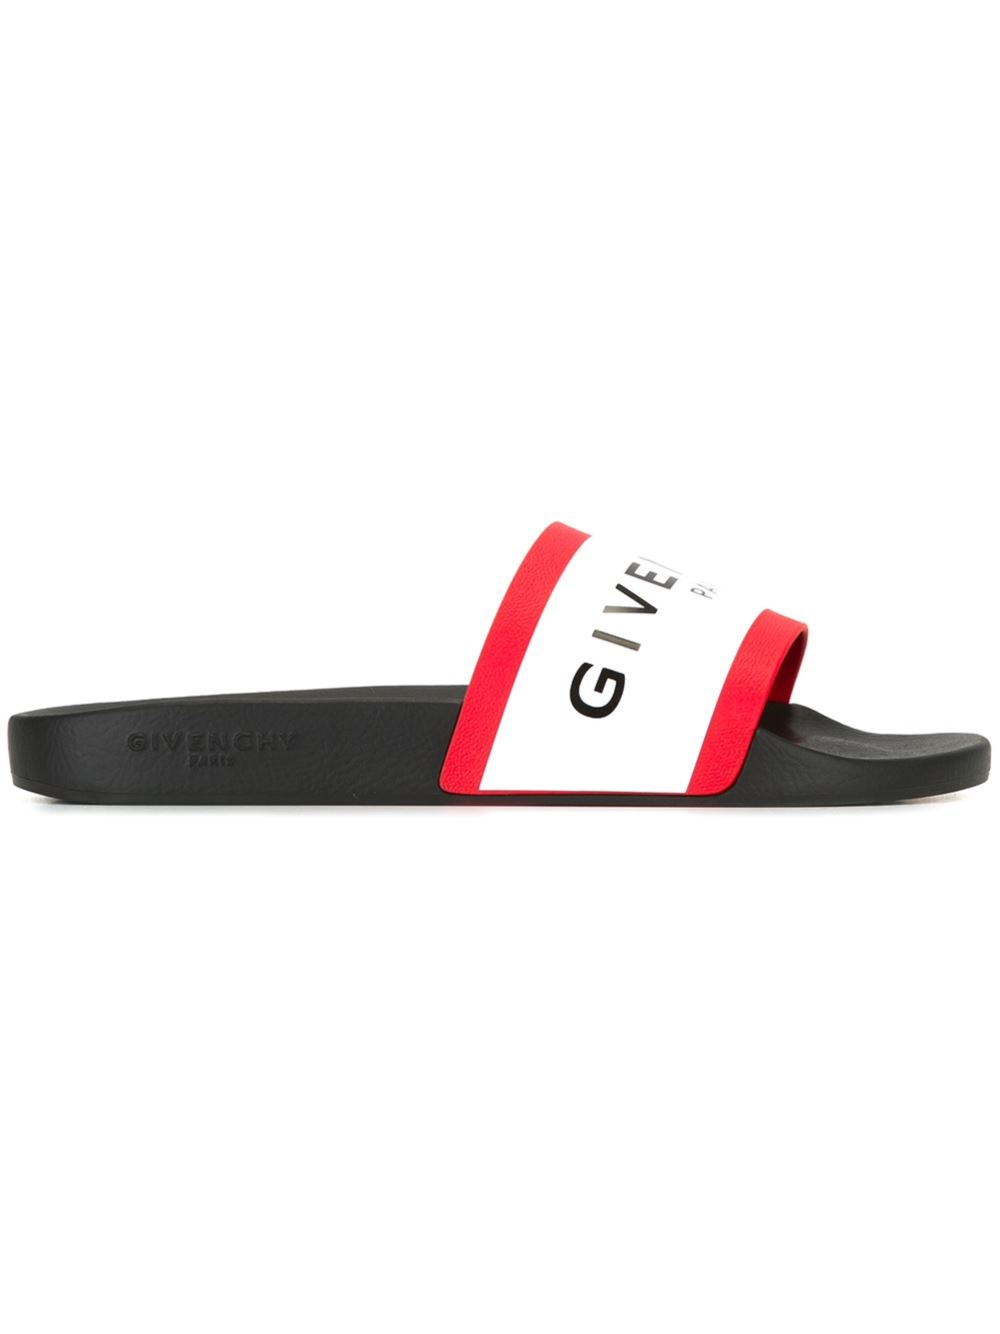 red and white givenchy slides